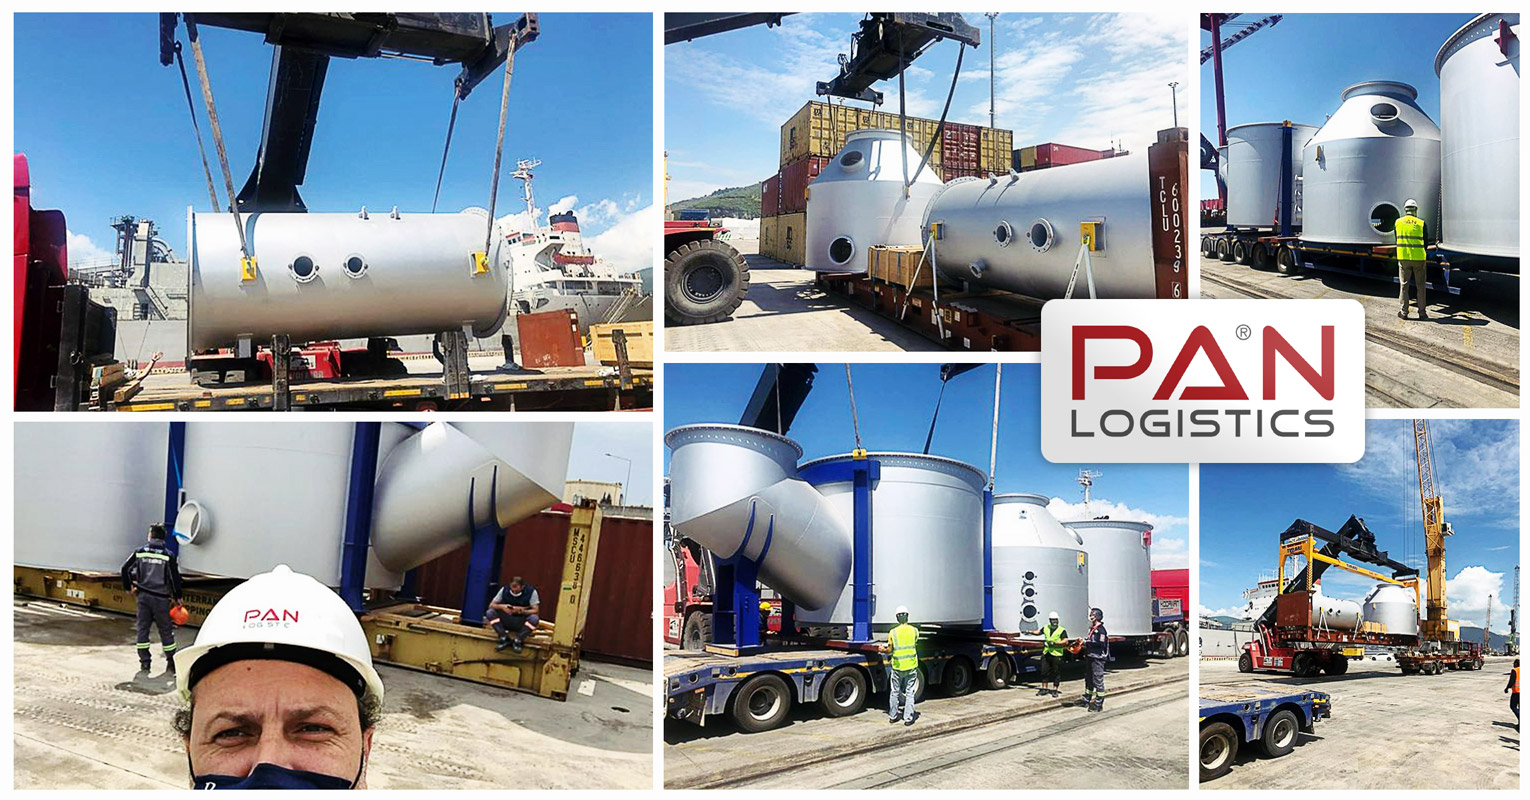 Pan Logistics Handled 5 Units Scrubber Parts from Aarus, Denmark to Gemlik, Turkey with Delivery to the Shipyard at Yalova